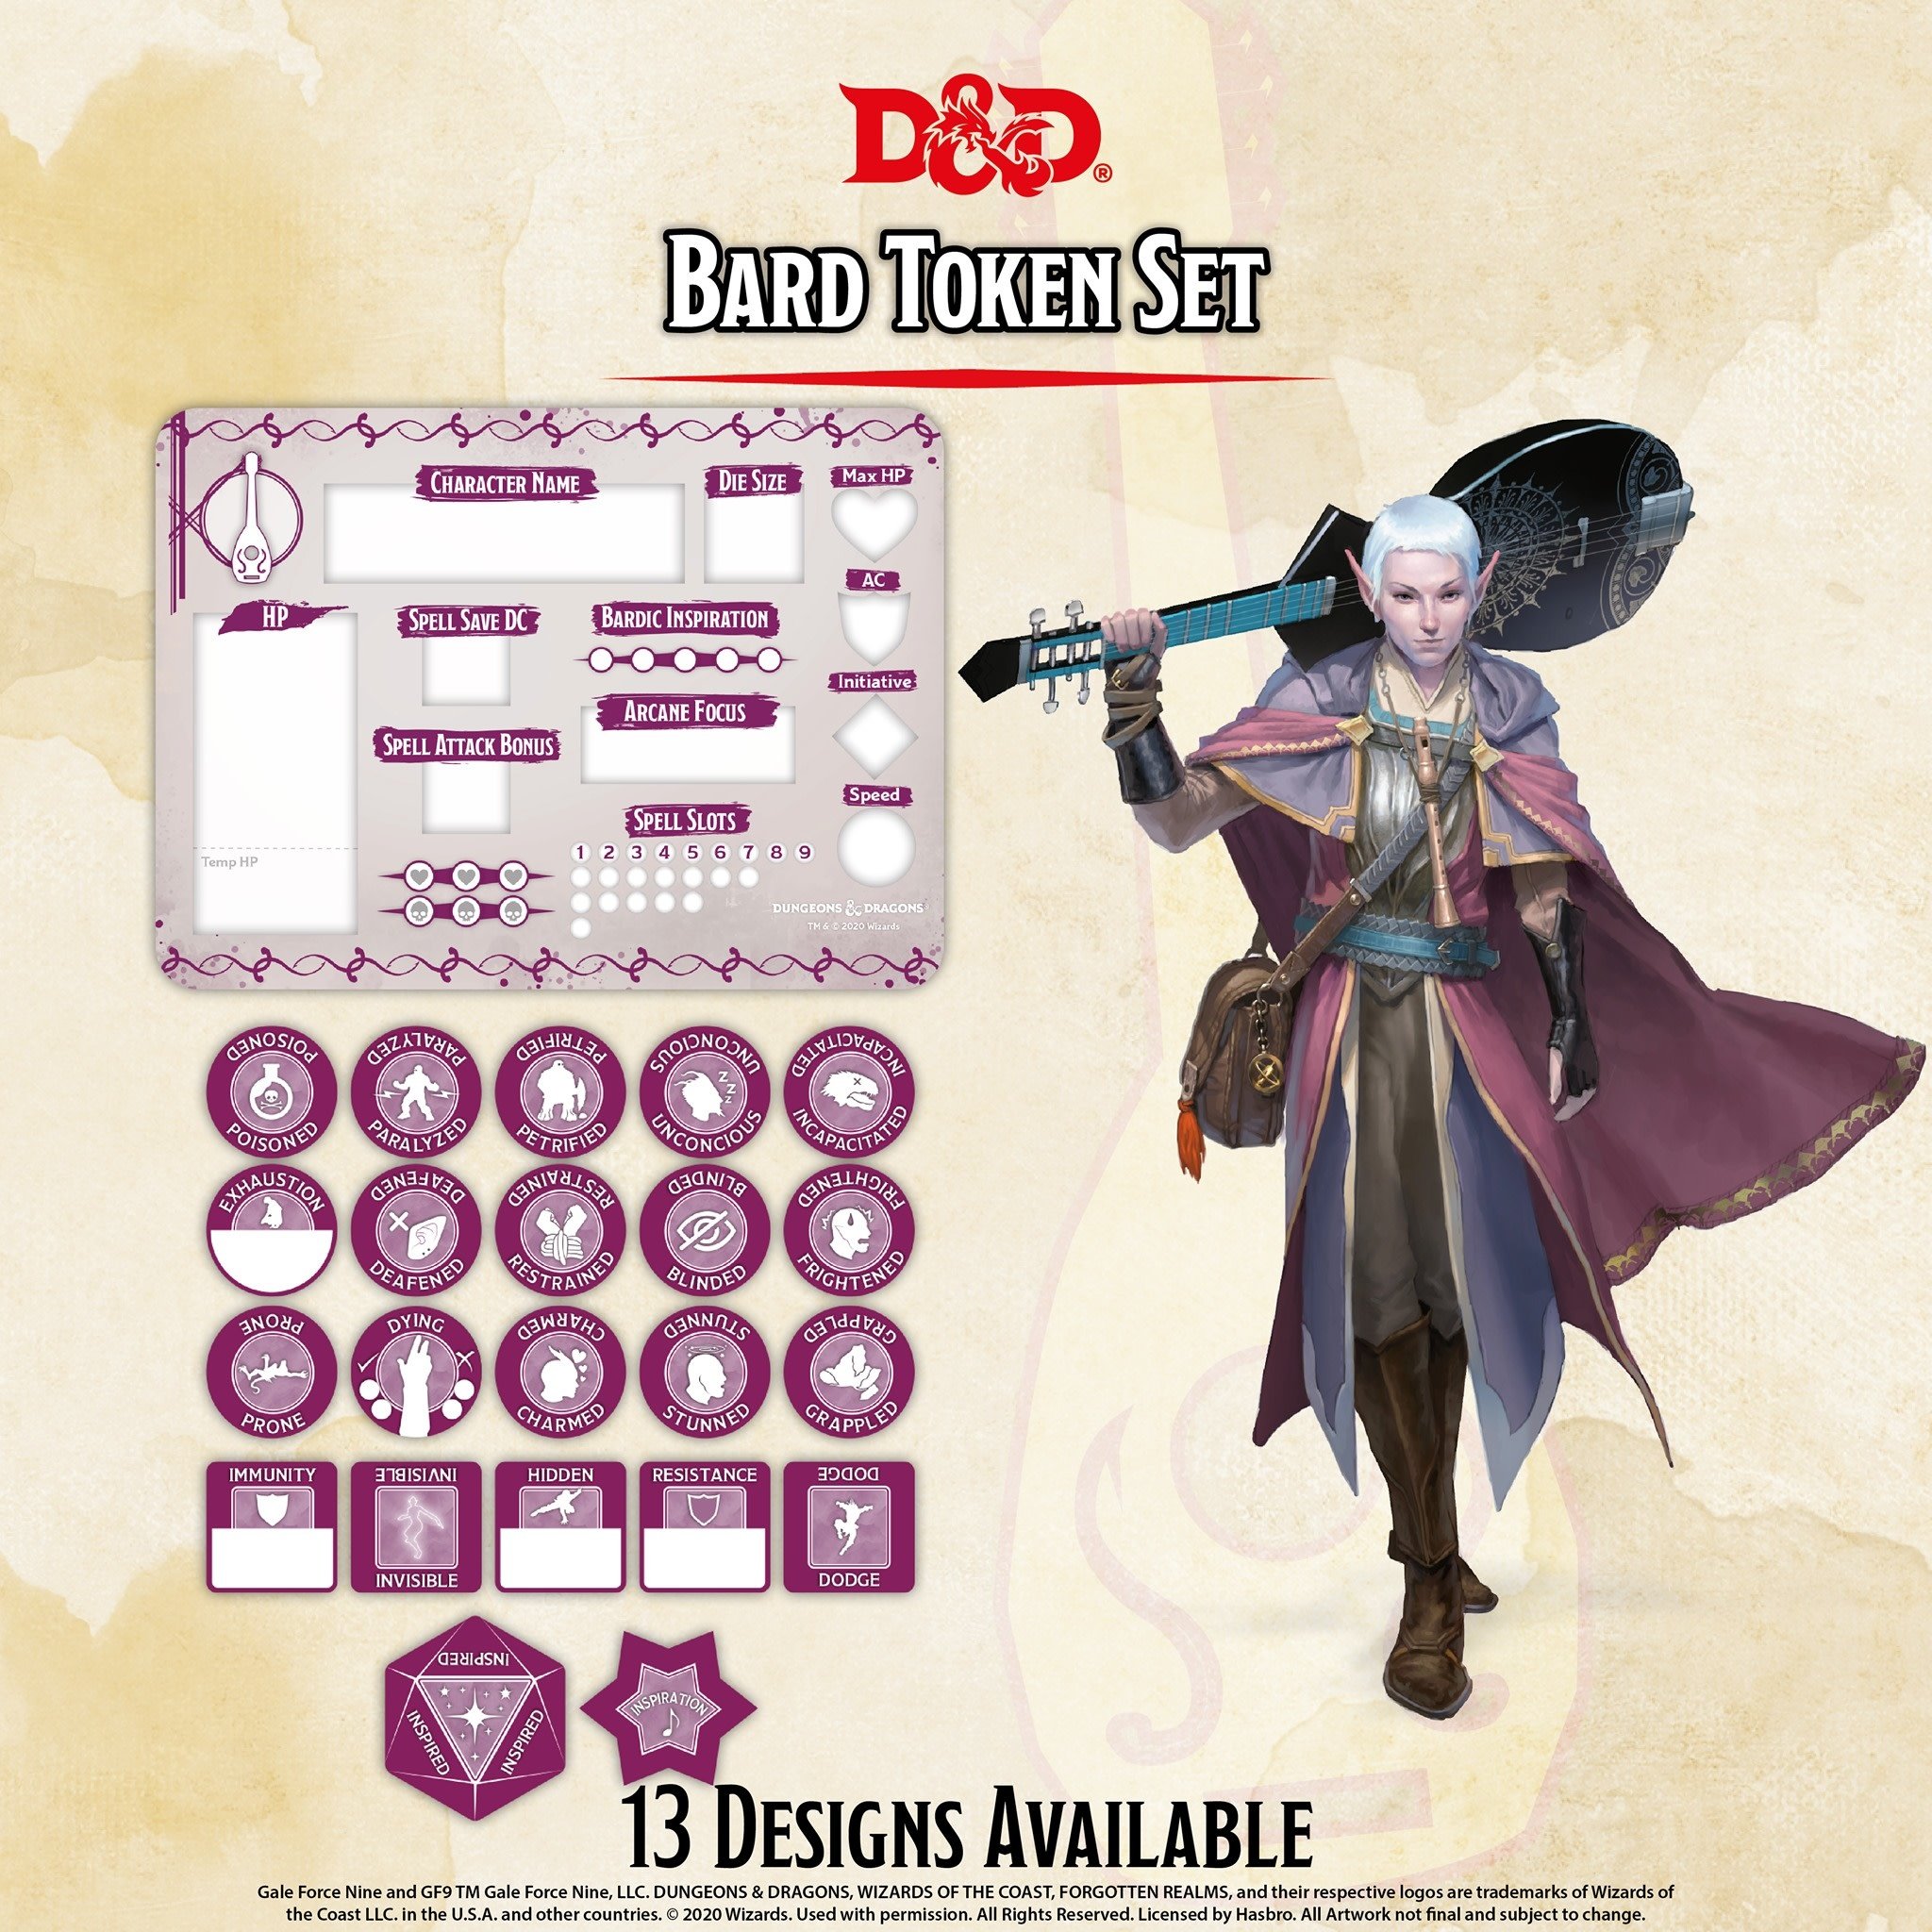 dungeons and dragons 5e character builder free